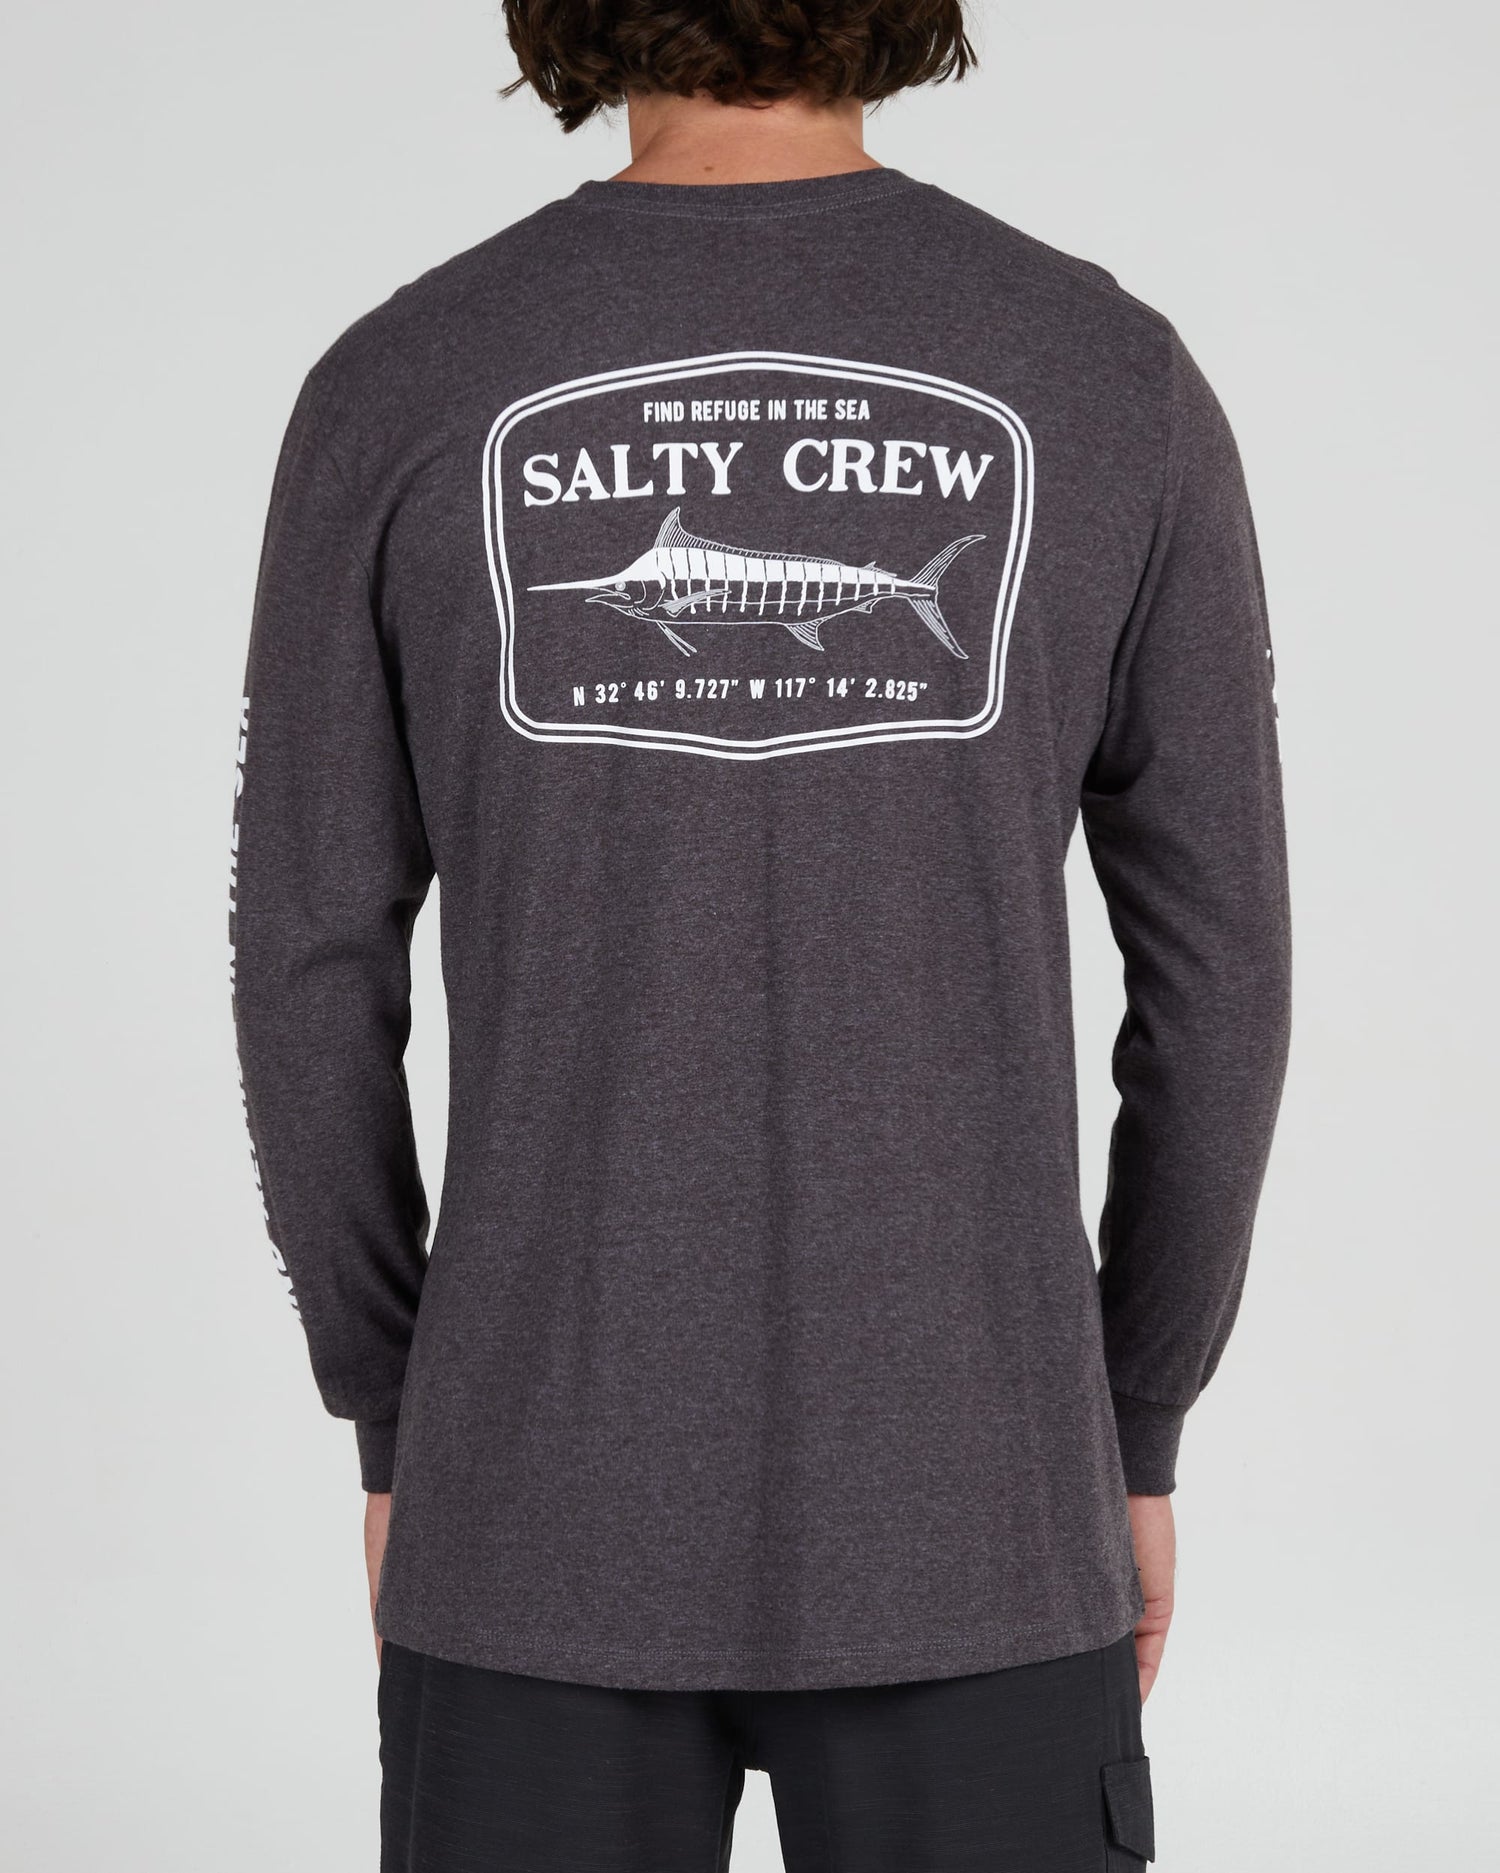 Salty crew T-SHIRTS L/S STEALTH STANDARD L/S TEE - CHARCOAL HEATHER in CHARCOAL HEATHER